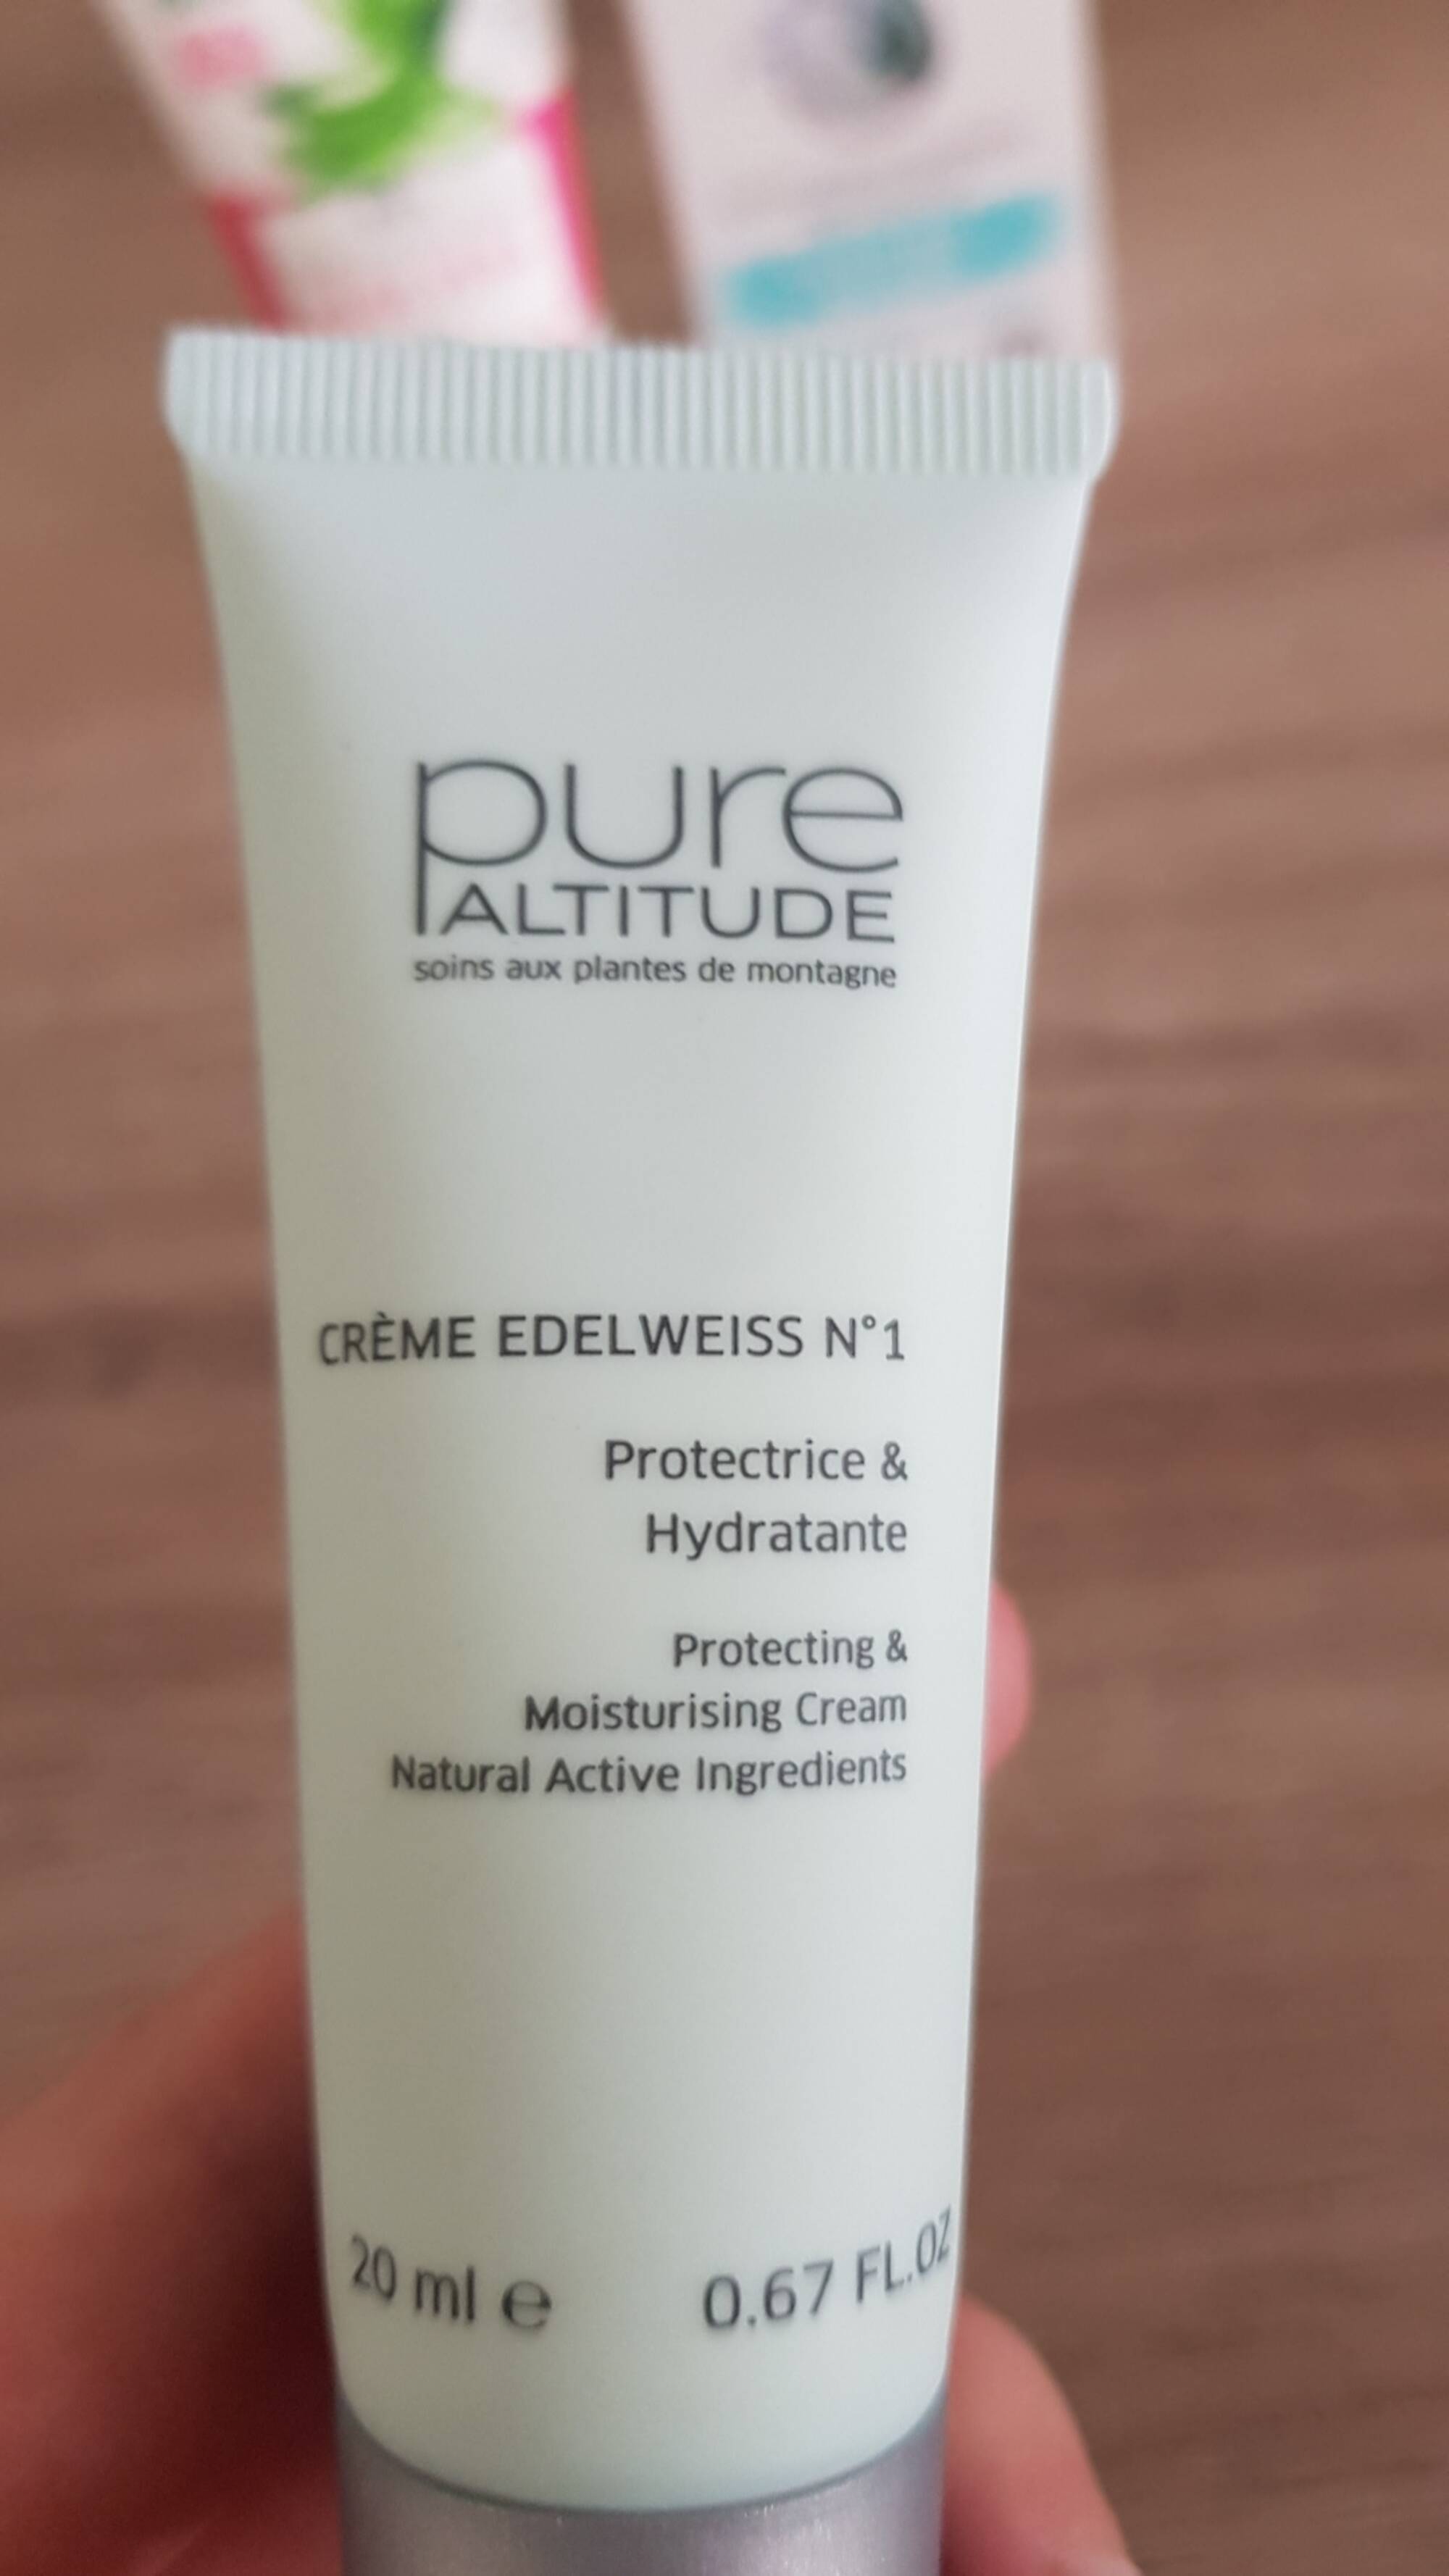 PURE ALTITUDE - Crème edelweiss n°1 protectrice & hydratante